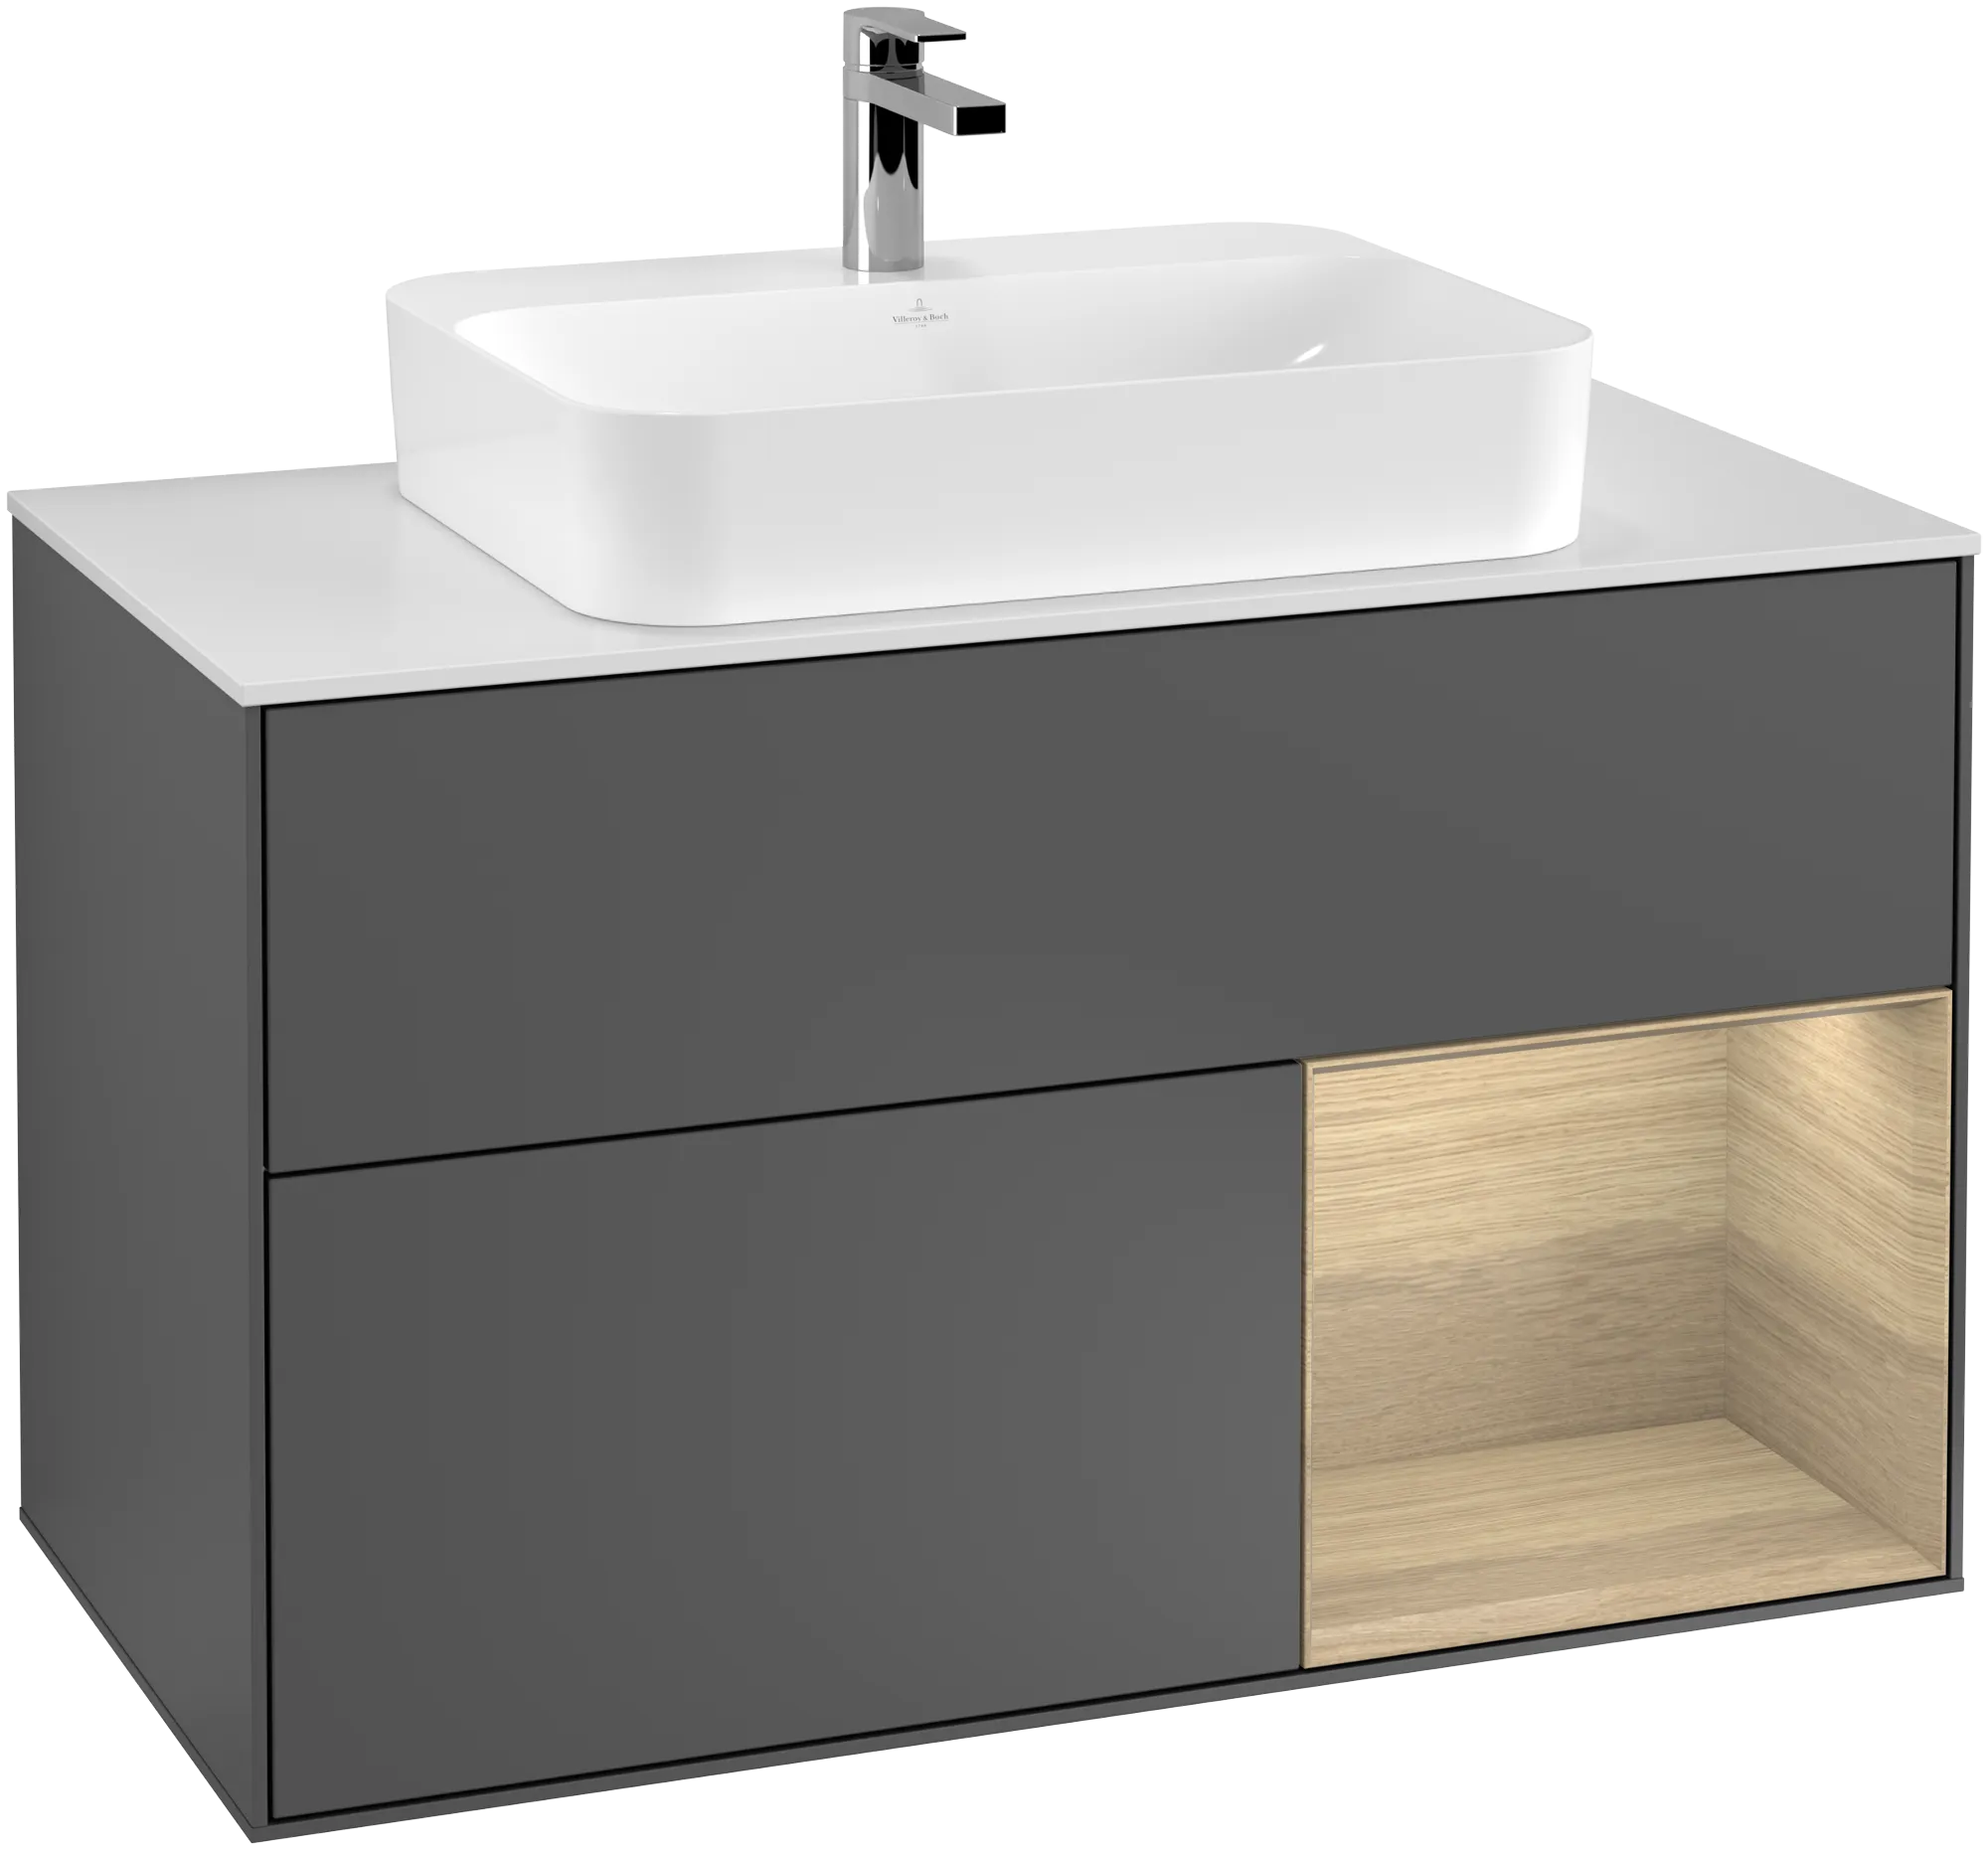 Picture of VILLEROY BOCH Finion Vanity unit, with lighting, 2 pull-out compartments, 1000 x 603 x 501 mm, Anthracite Matt Lacquer / Oak Veneer / Glass White Matt #G371PCGK